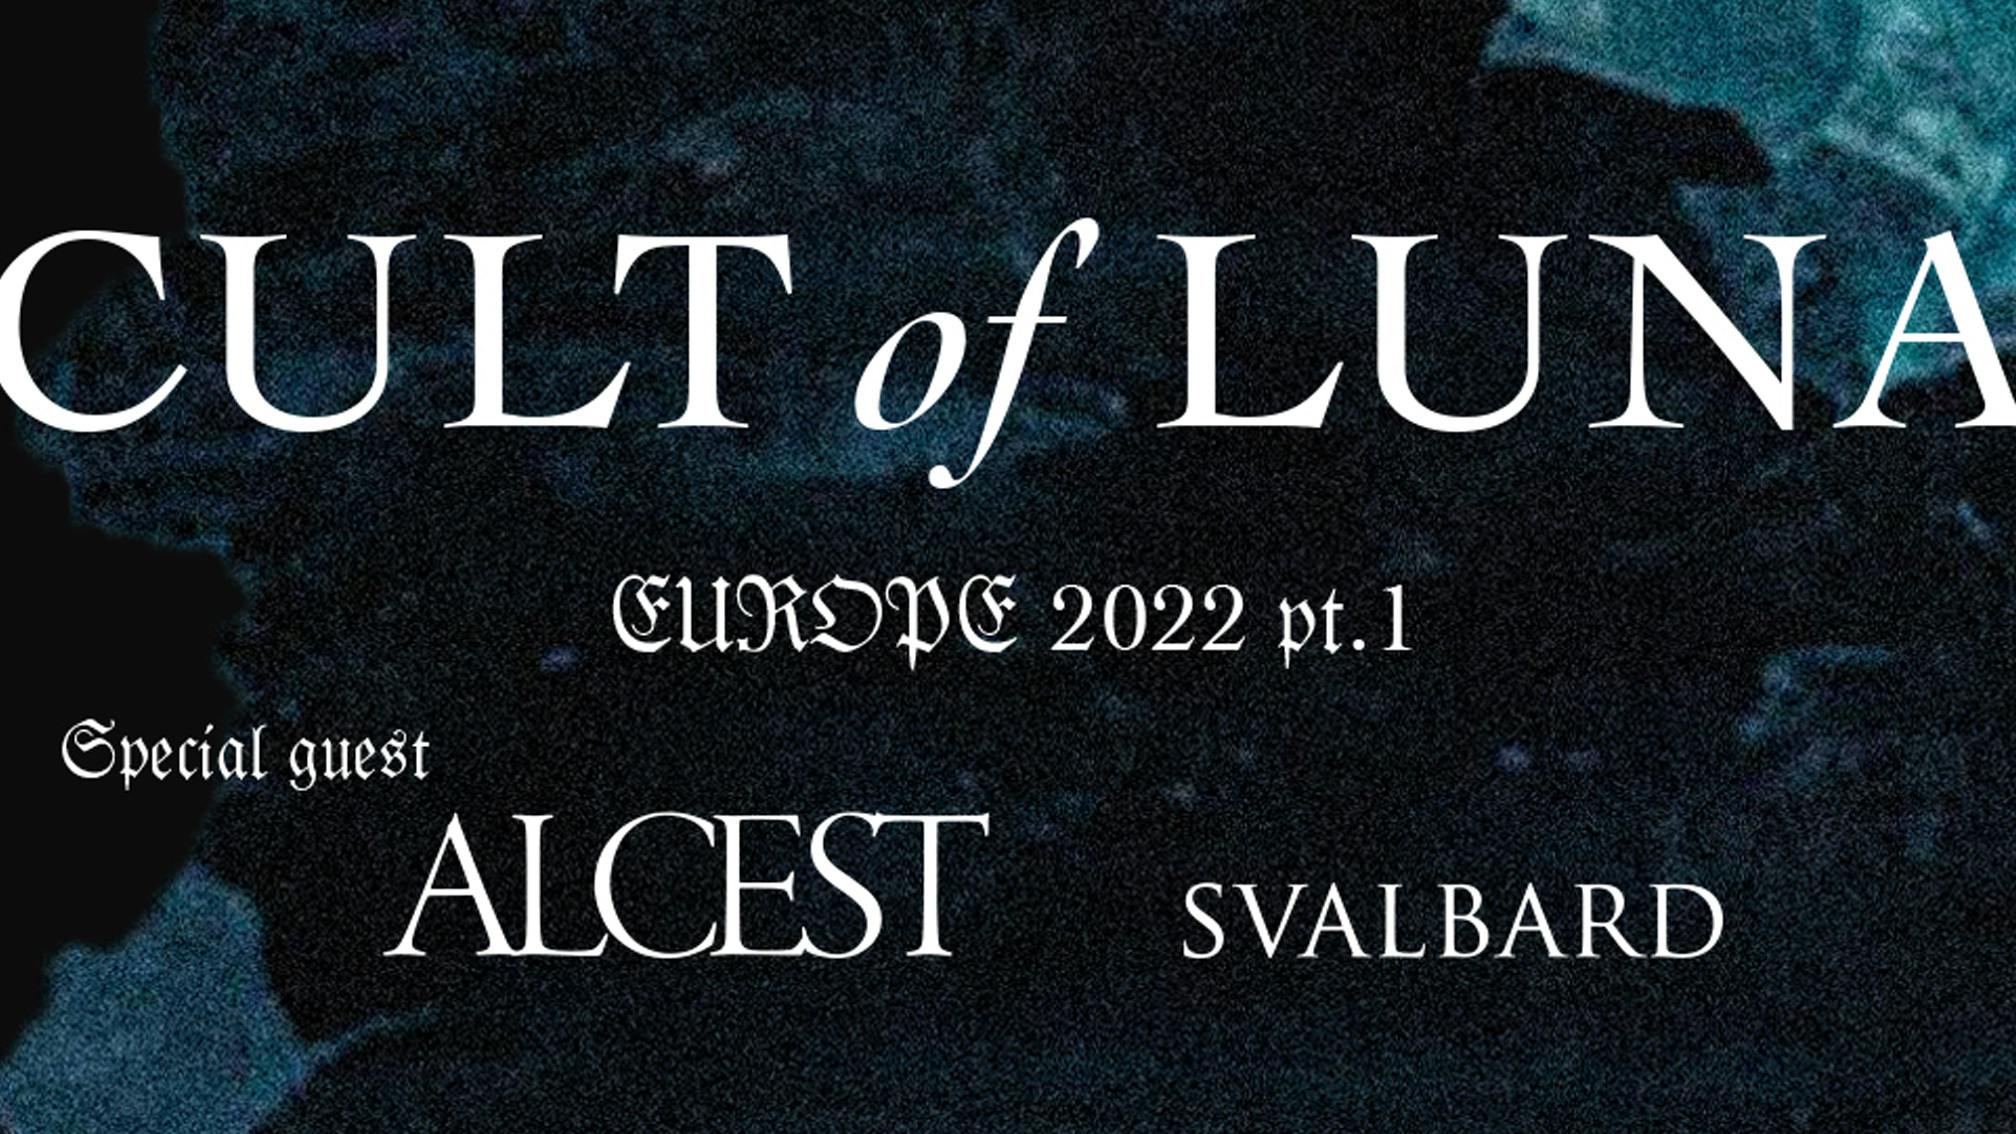 Cult of Luna announce 2022 European / UK headline tour with Alcest and Svalbard